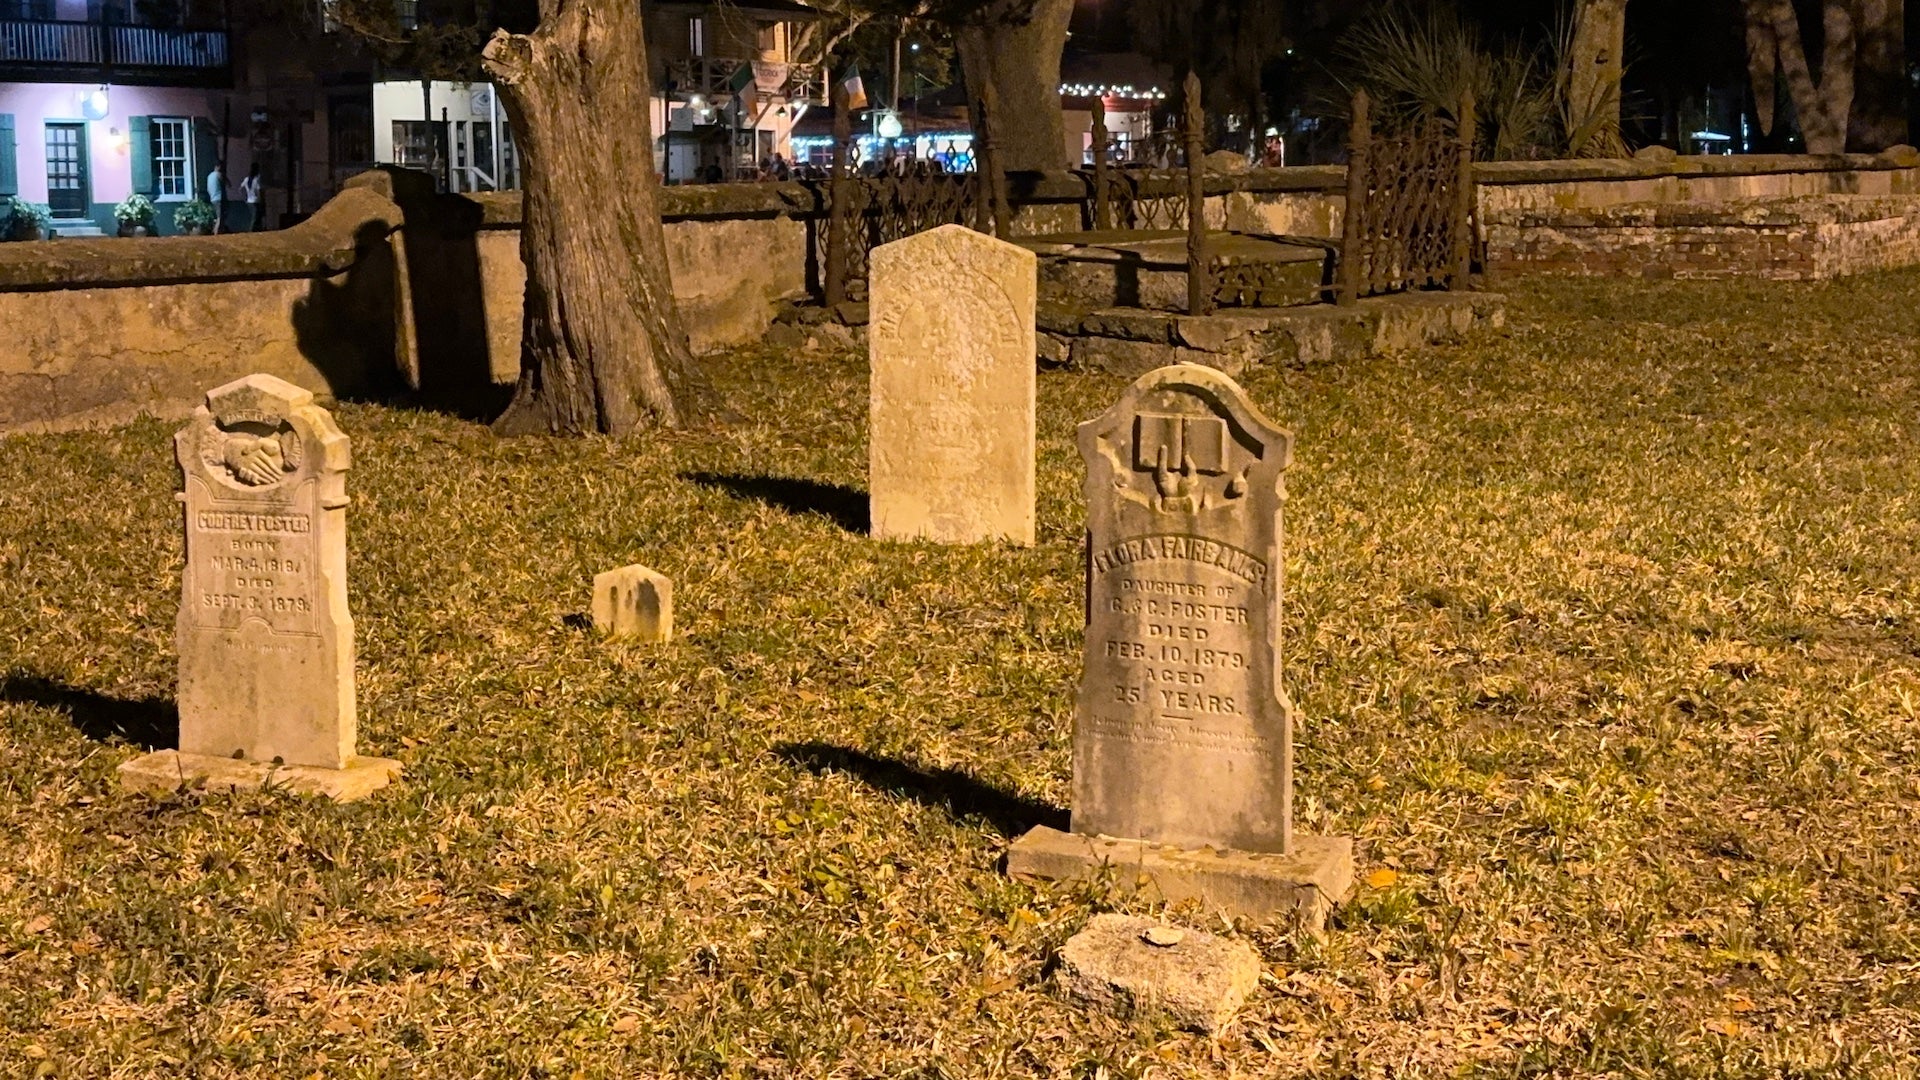 Gravestones in a cemetery at night